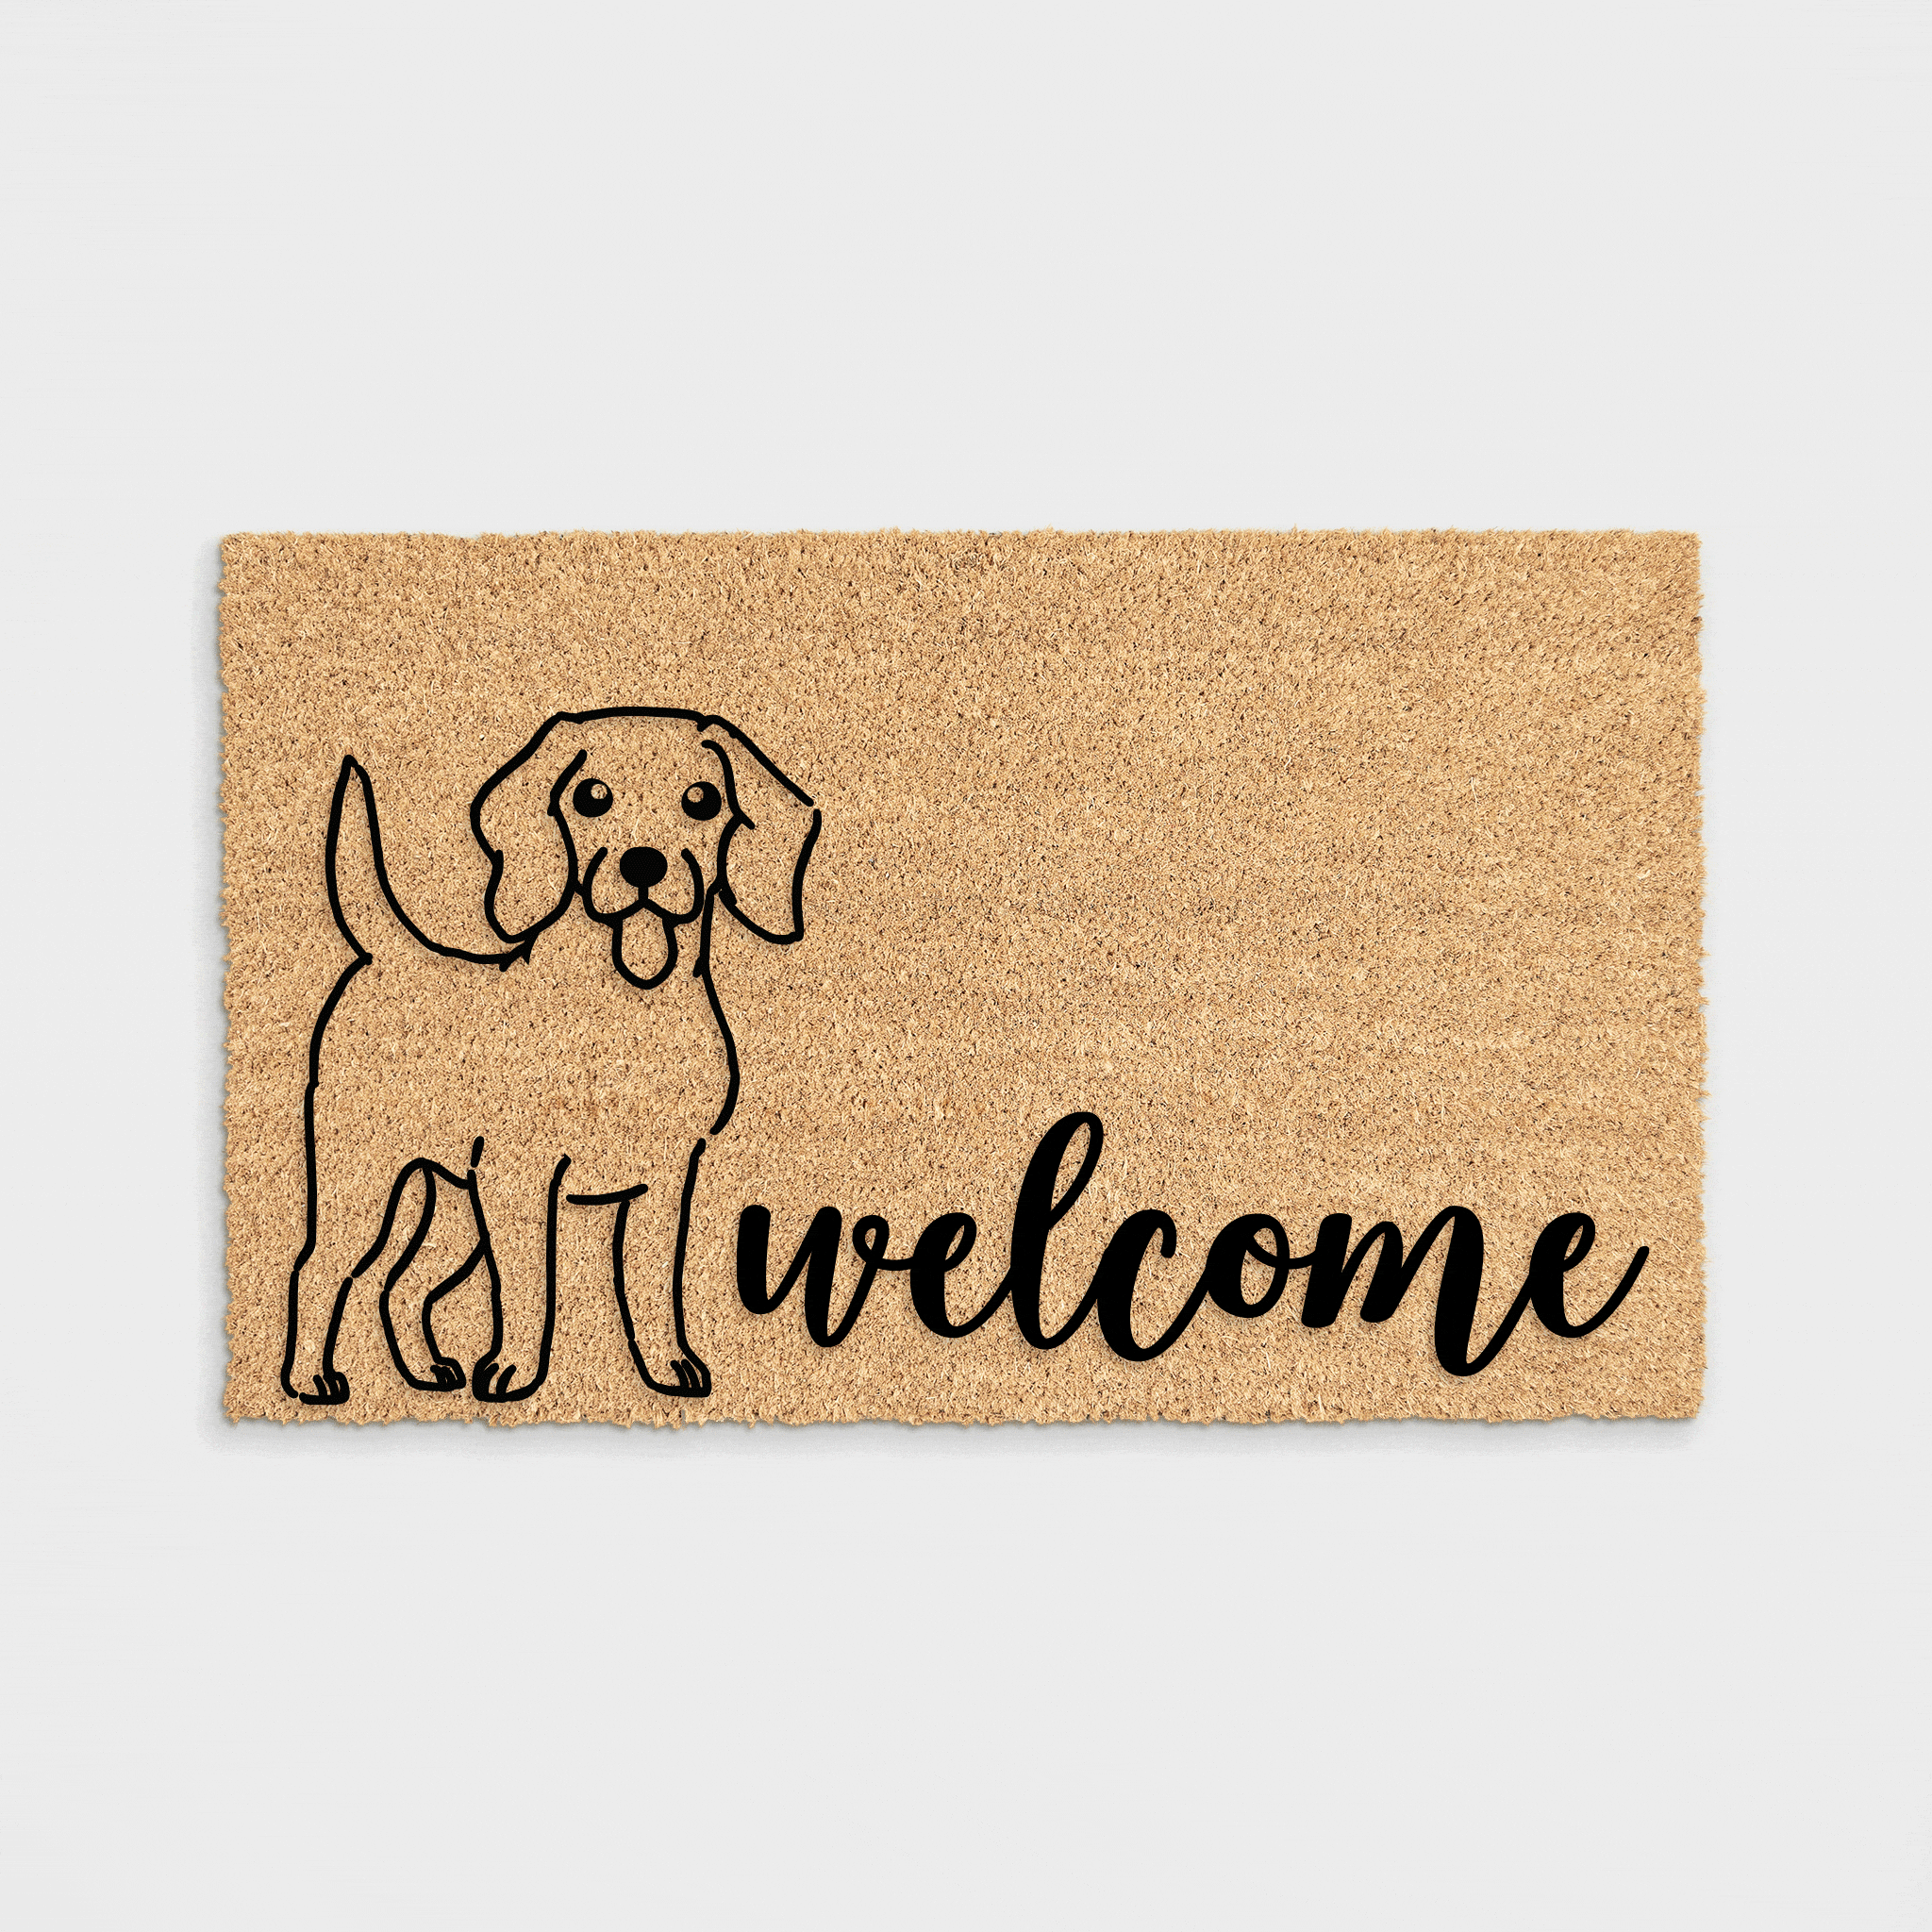 Hope You Like Golden Retriever Dogs Welcome Mat, Perfect Gift for Dog